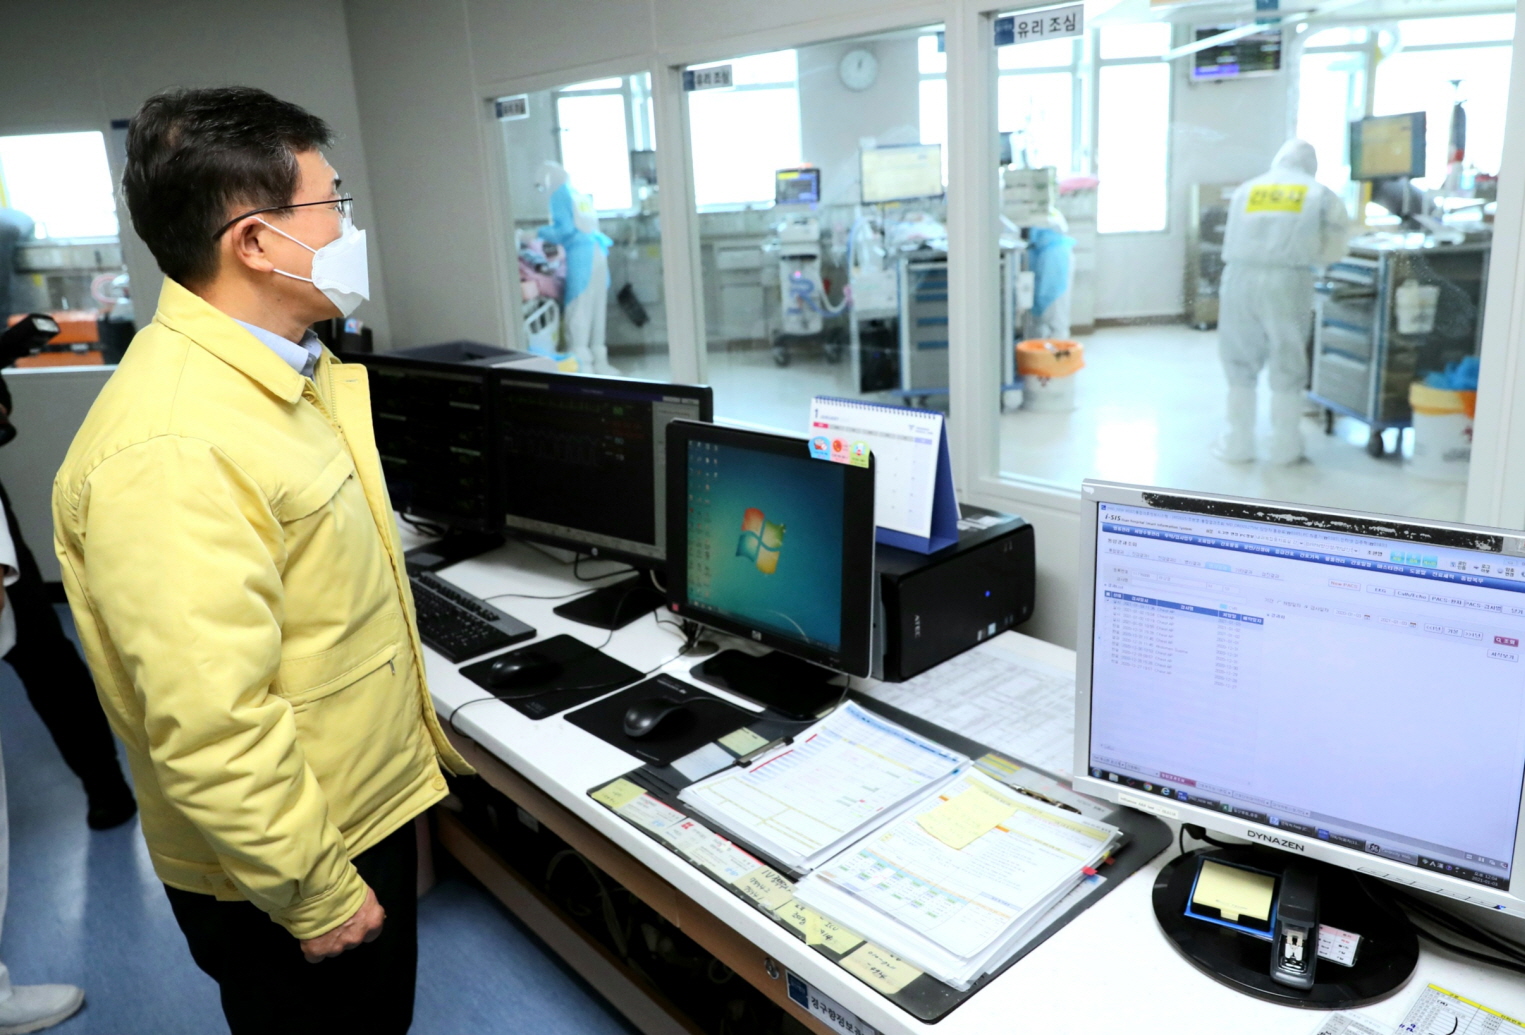 Minister Kwon Checks Hospital Networks in North Gyeonggi for COVID-19 Treatment (January 3) 사진12